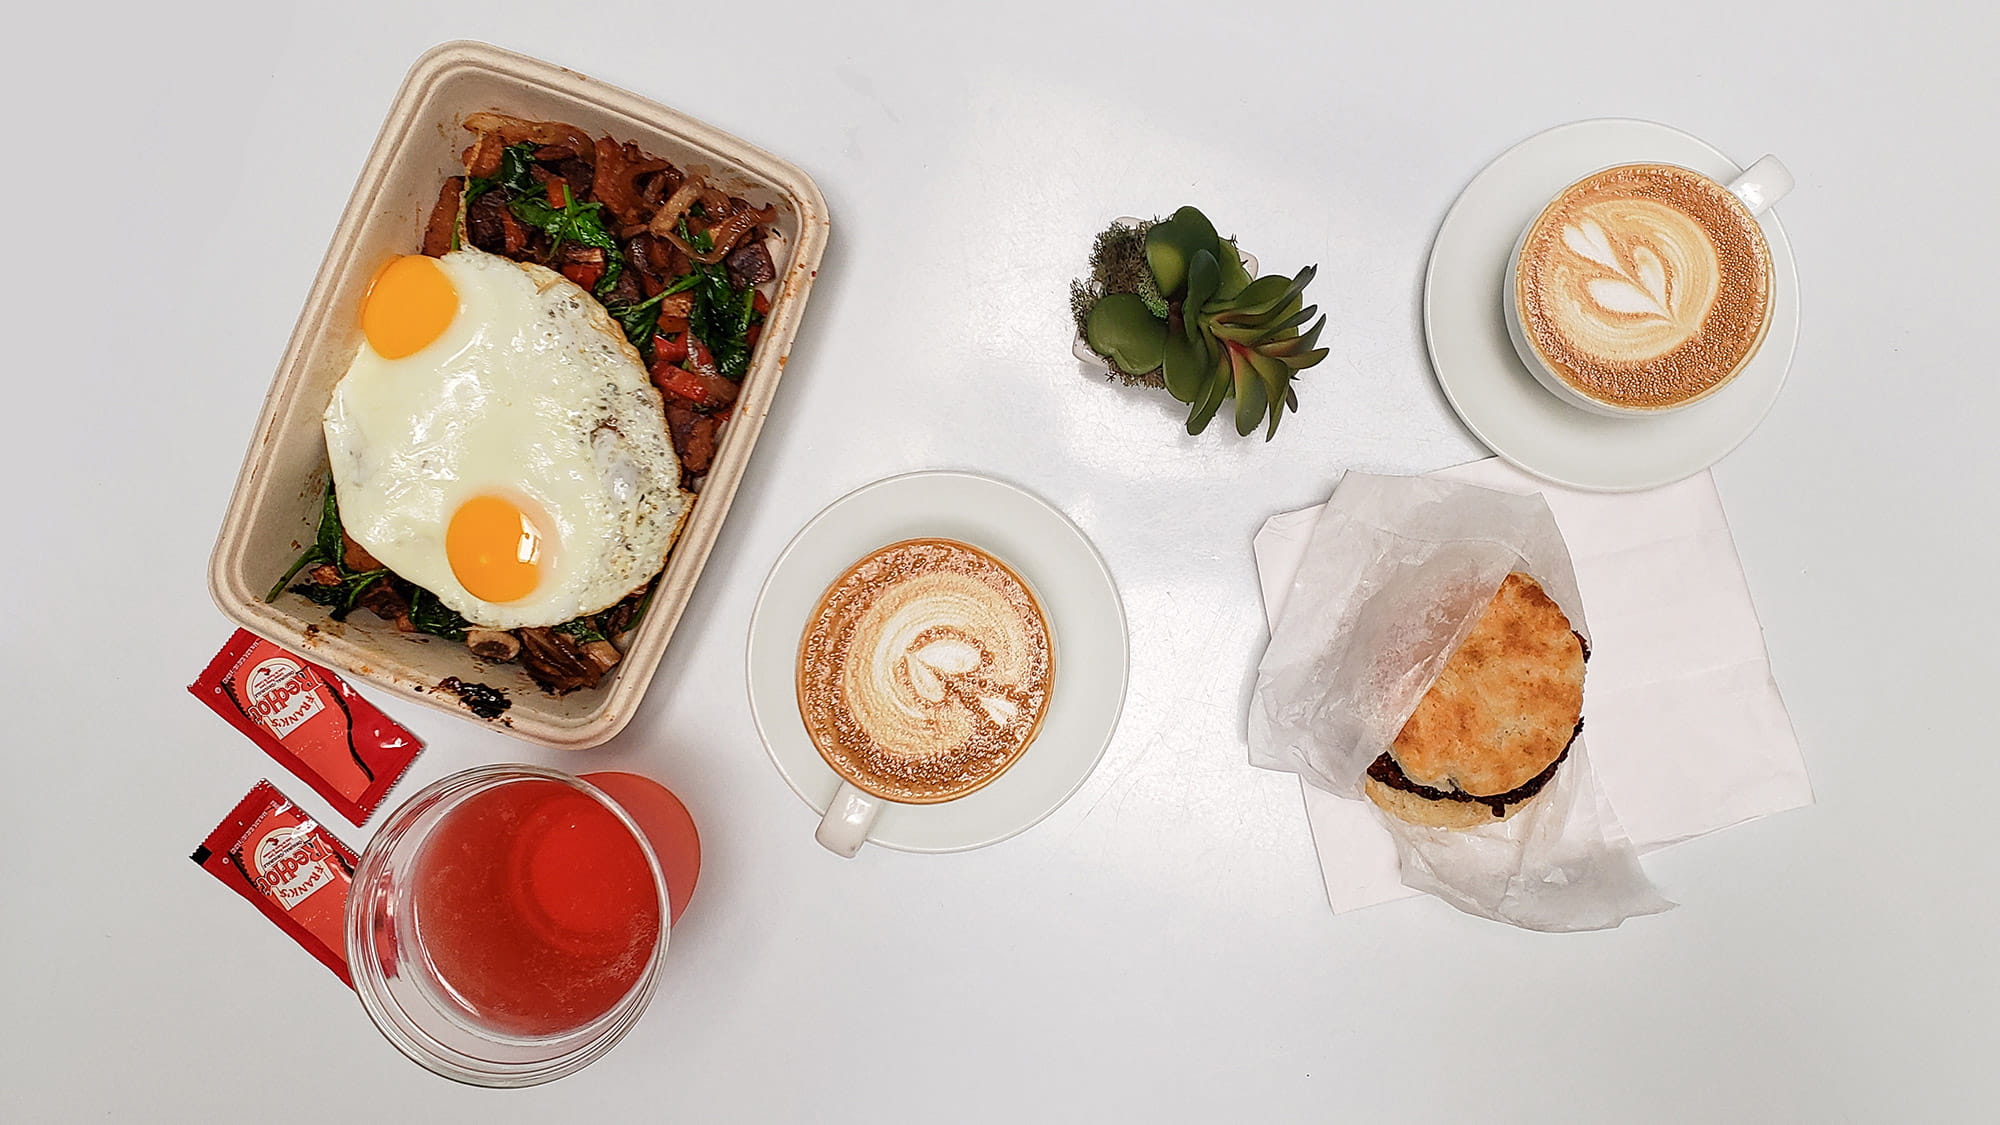 Food on white table. Vegan power bowl with two eggs, a chicken biscuit and Kombucha from Good Thyme LKLD. Two lattes from Concord Coffee.